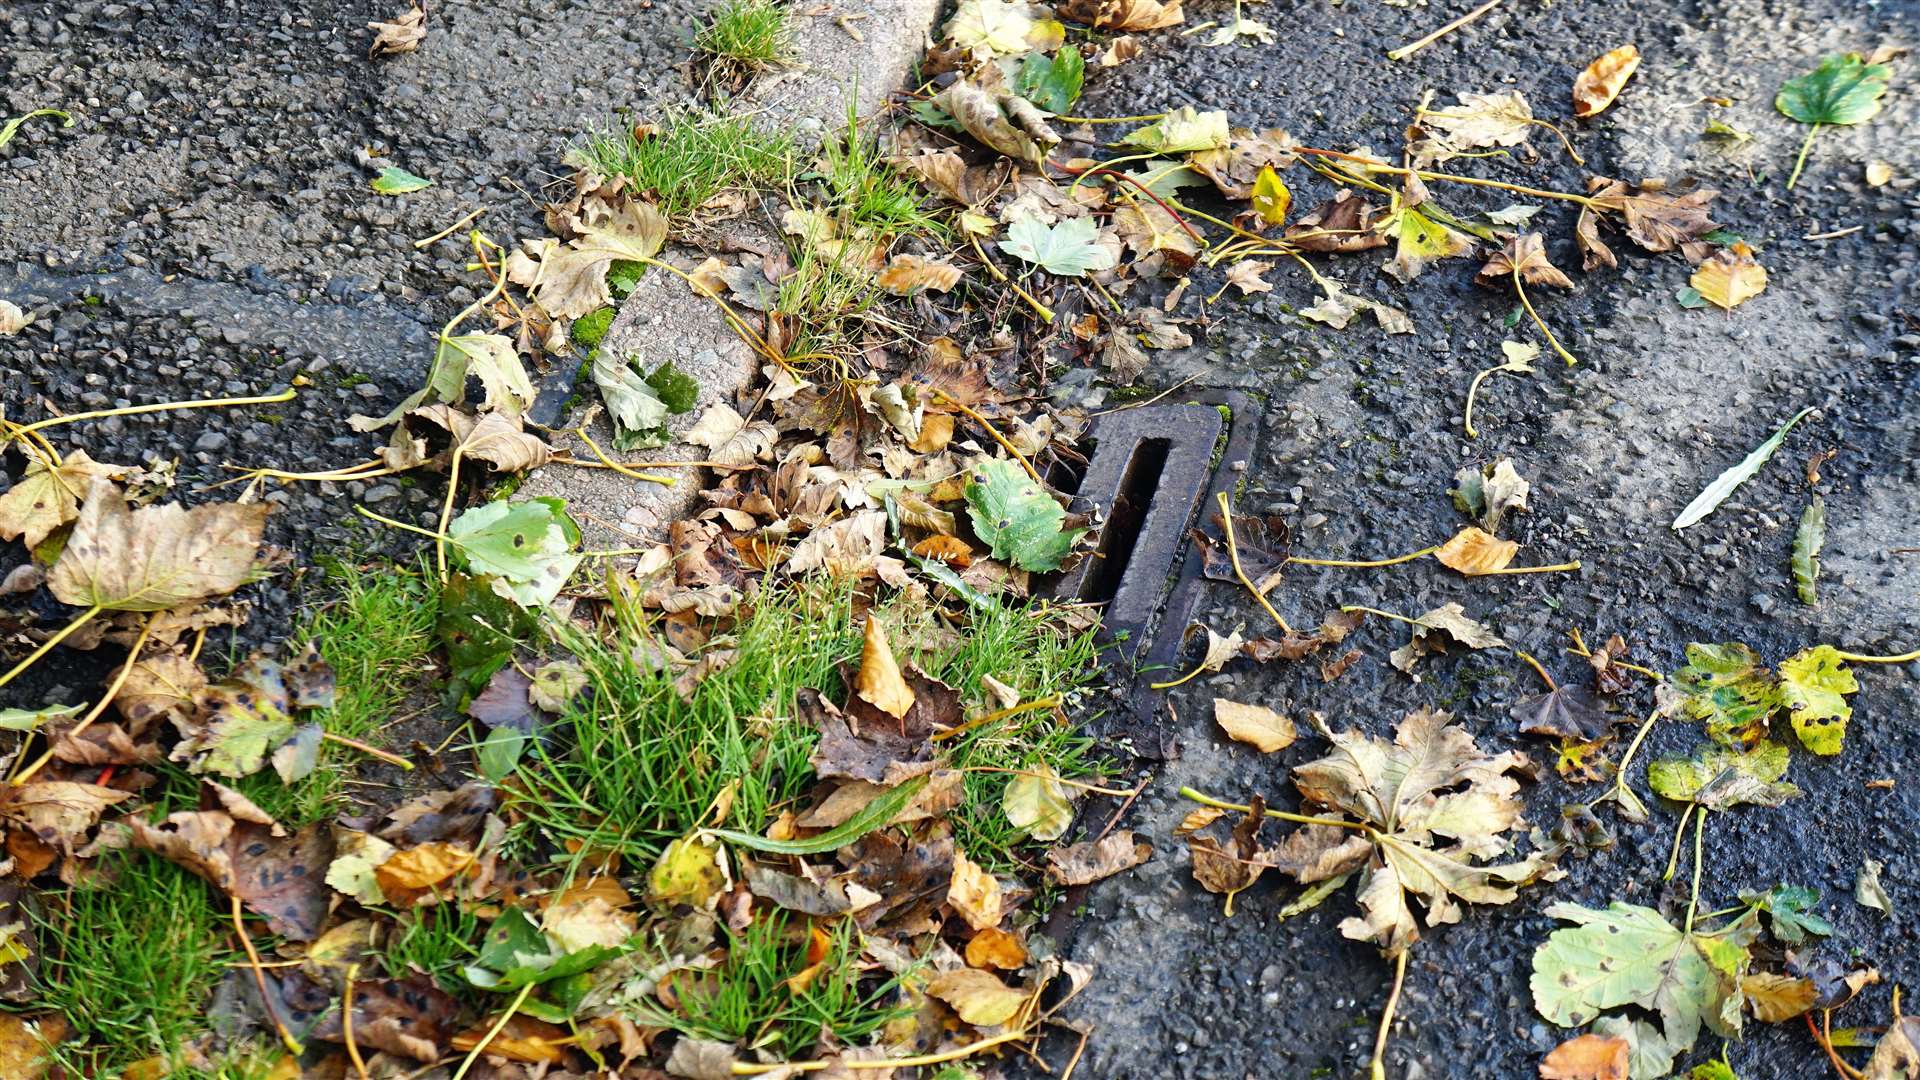 This drain on Banks Road in Watten has become choked with weeds. Picture: DGS